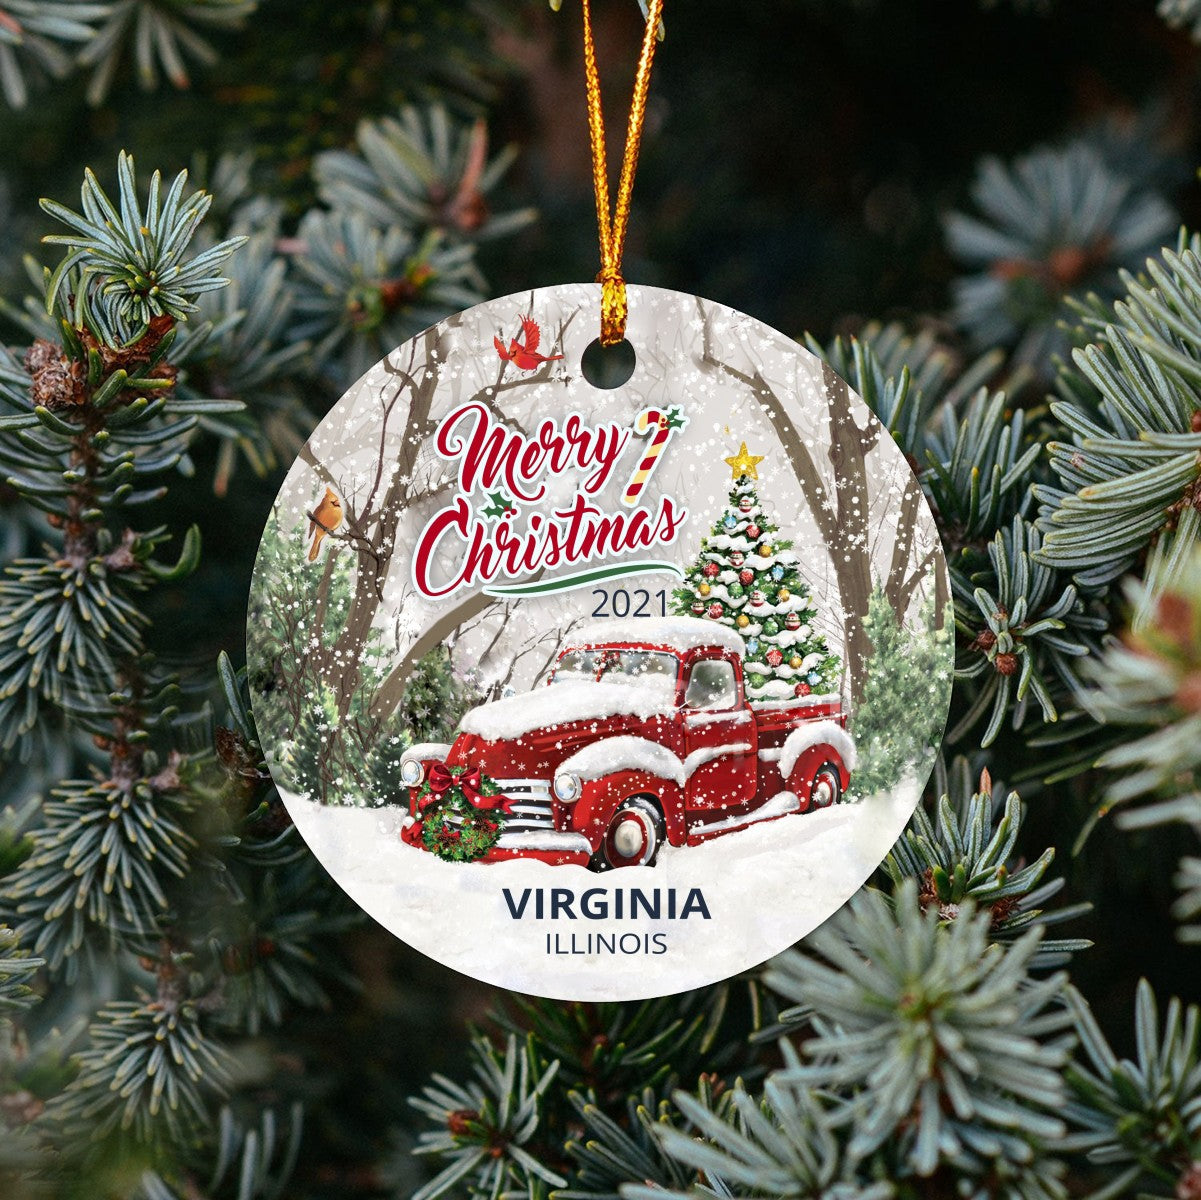 Christmas Tree Ornaments Virginia - Ornament With Name City, State Virginia Illinois IL Ornament - Red Truck Xmas Ornaments 3'' Plastic Gift For Family, Friend And Housewarming